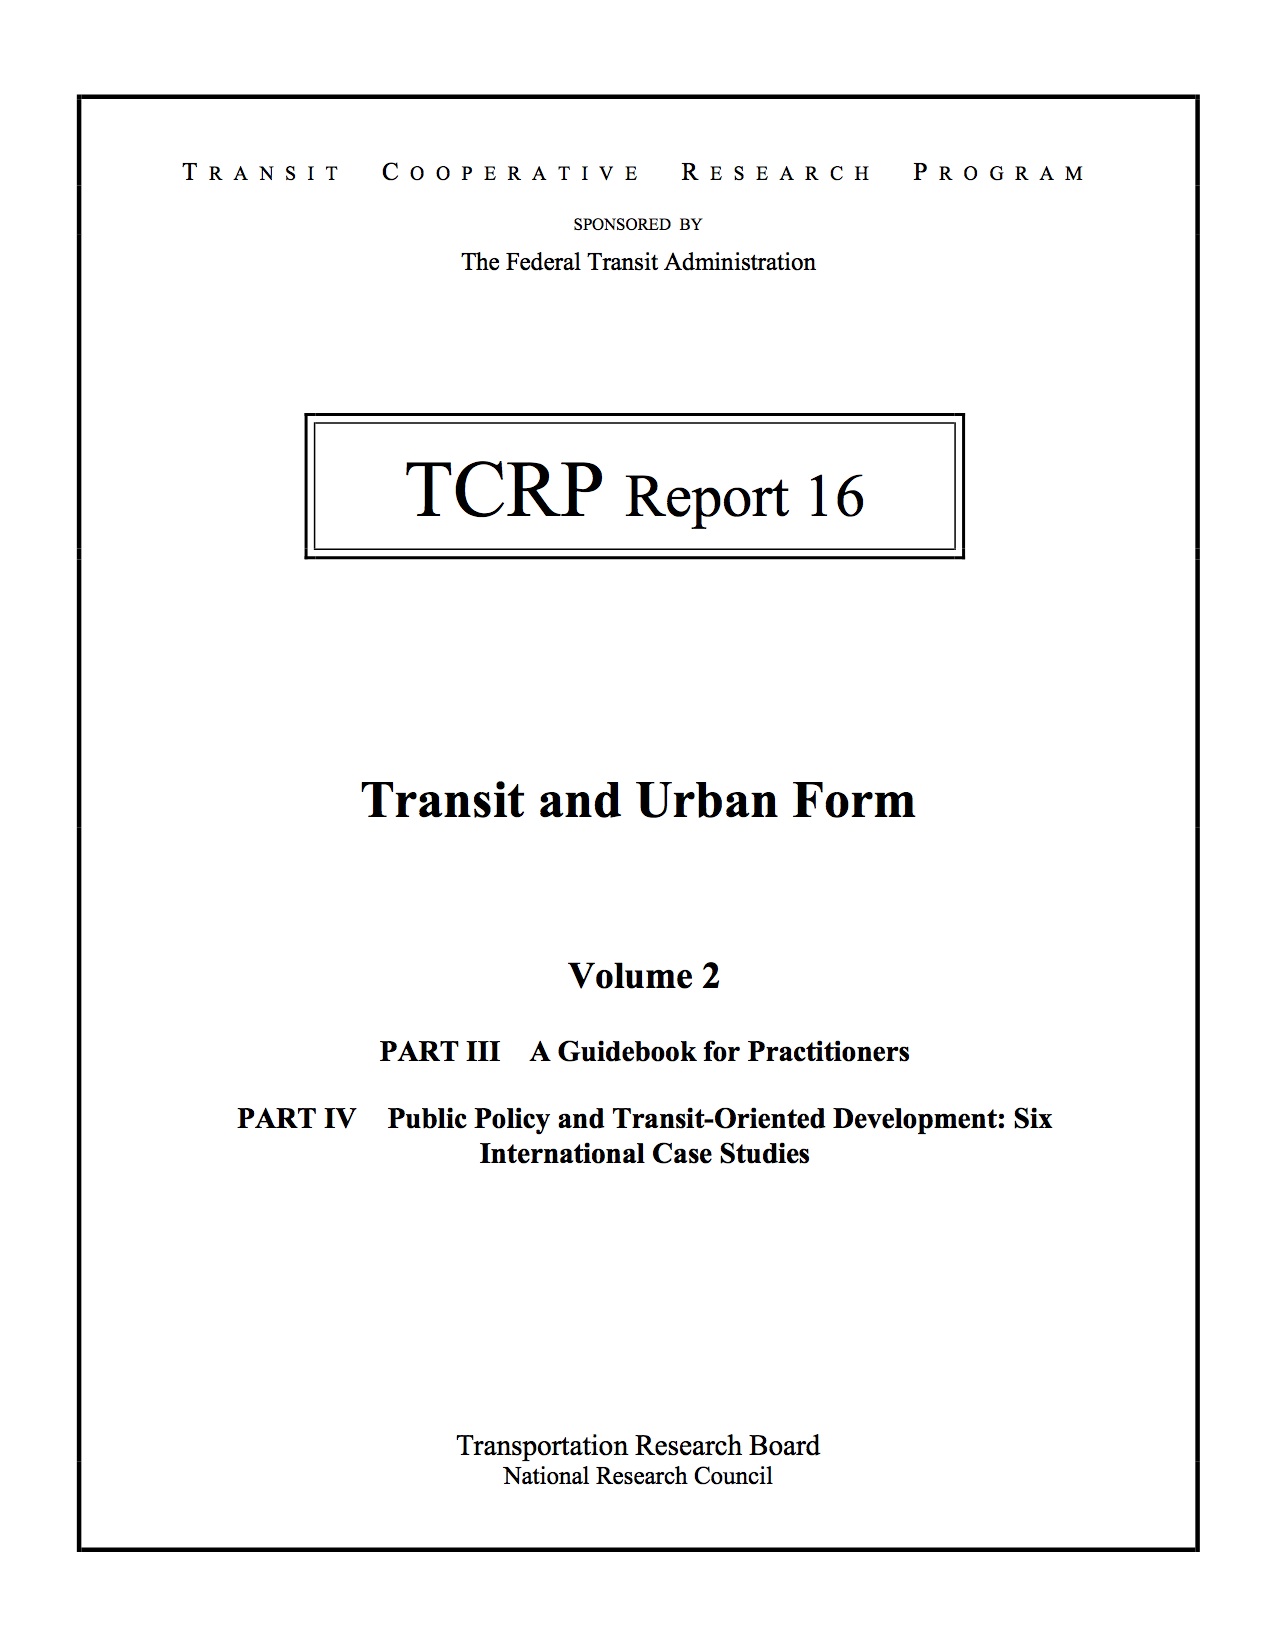 Transit and Urban Form – Volume 2, Part III A Guidebook for Practitioners